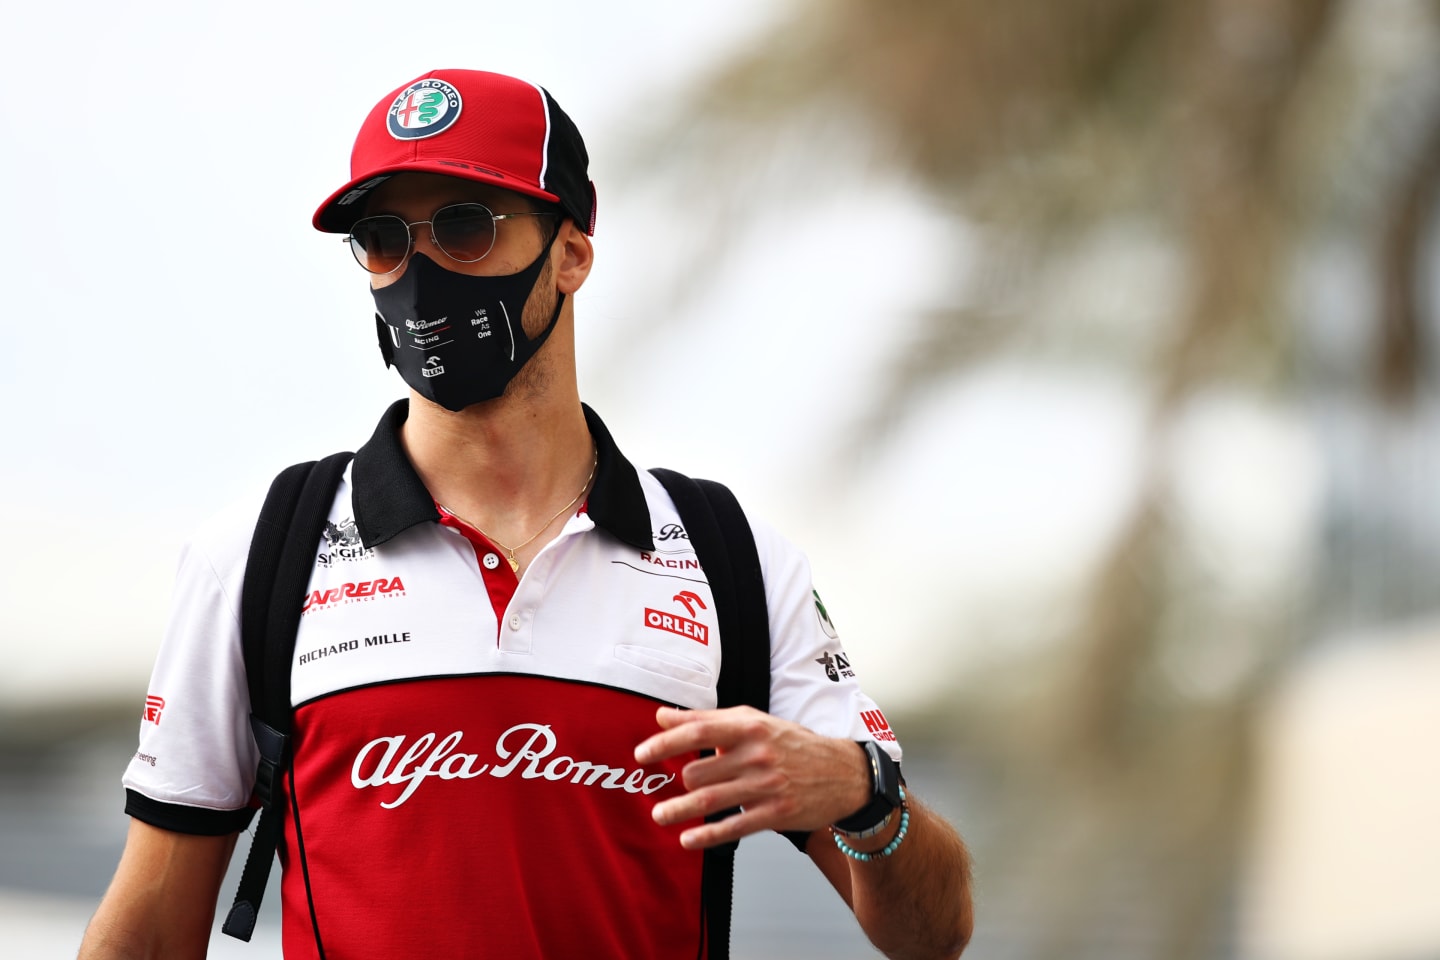 ABU DHABI, UNITED ARAB EMIRATES - DECEMBER 12: Antonio Giovinazzi of Italy and Alfa Romeo Racing walks in the Paddock before final practice ahead of the F1 Grand Prix of Abu Dhabi at Yas Marina Circuit on December 12, 2020 in Abu Dhabi, United Arab Emirates. (Photo by Mark Thompson/Getty Images)